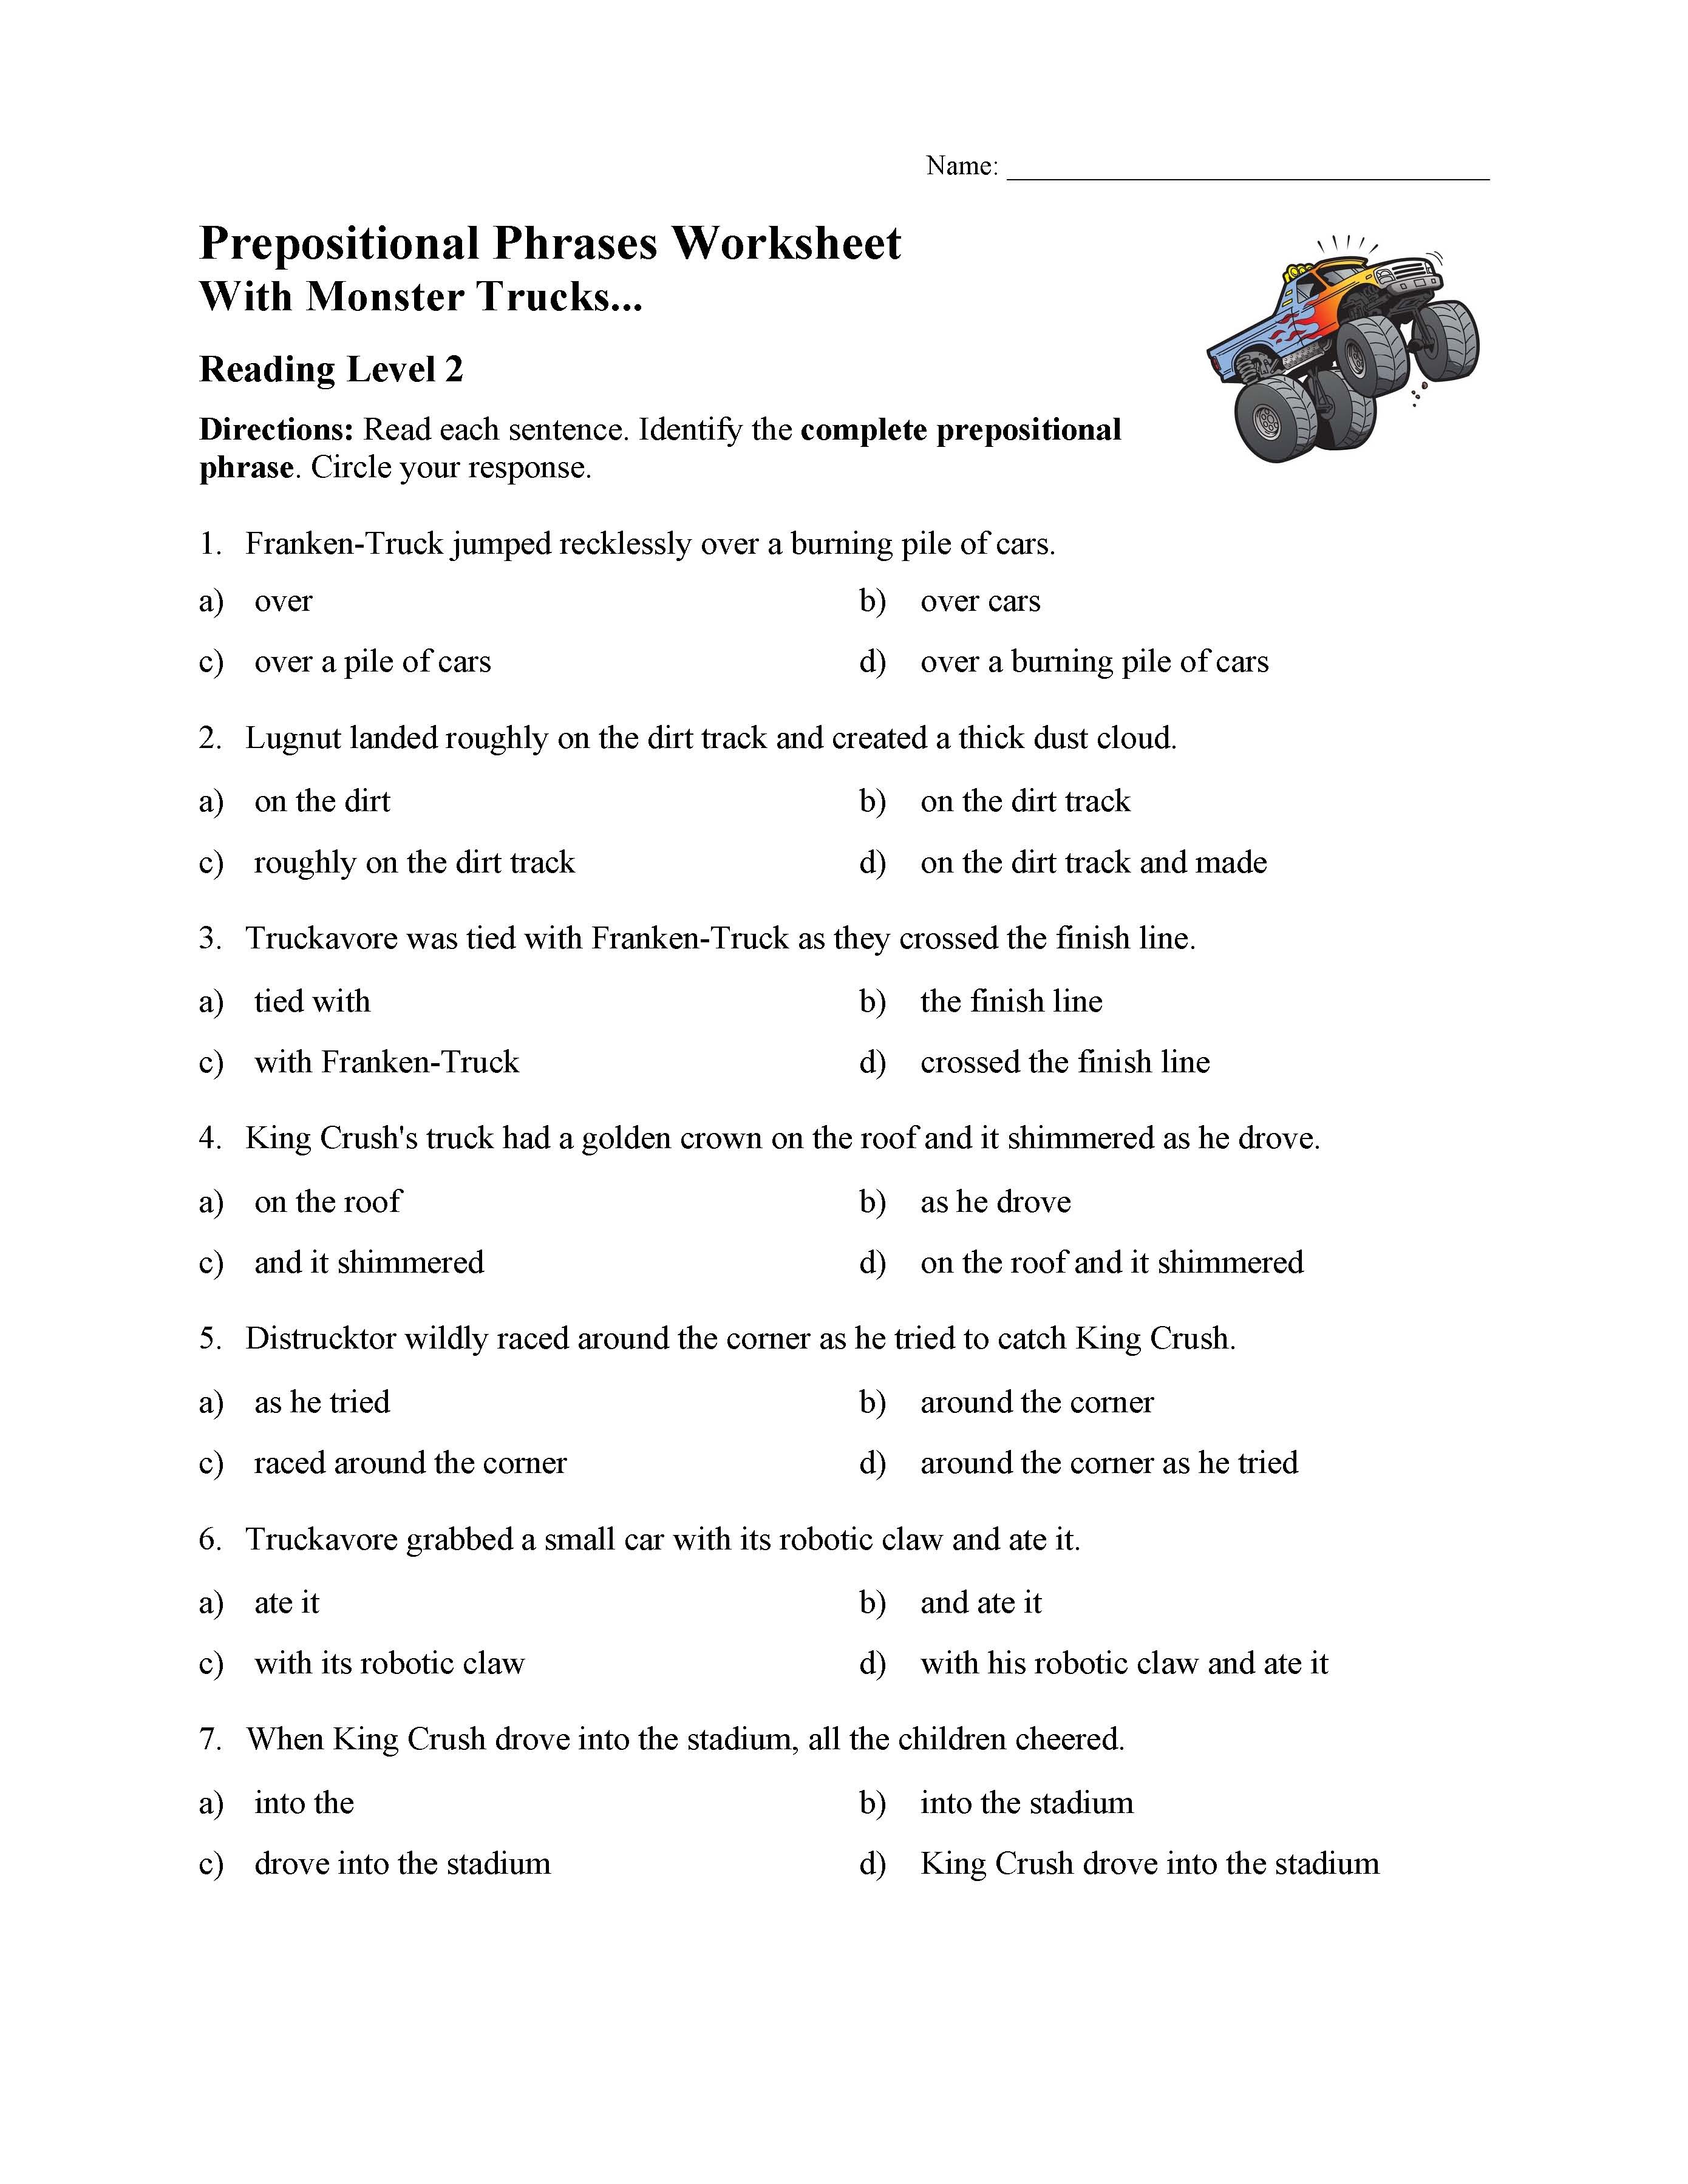 This is a preview image of Prepositional Phrases Worksheet | With Monster Trucks. Click on it to enlarge it or view the source file.